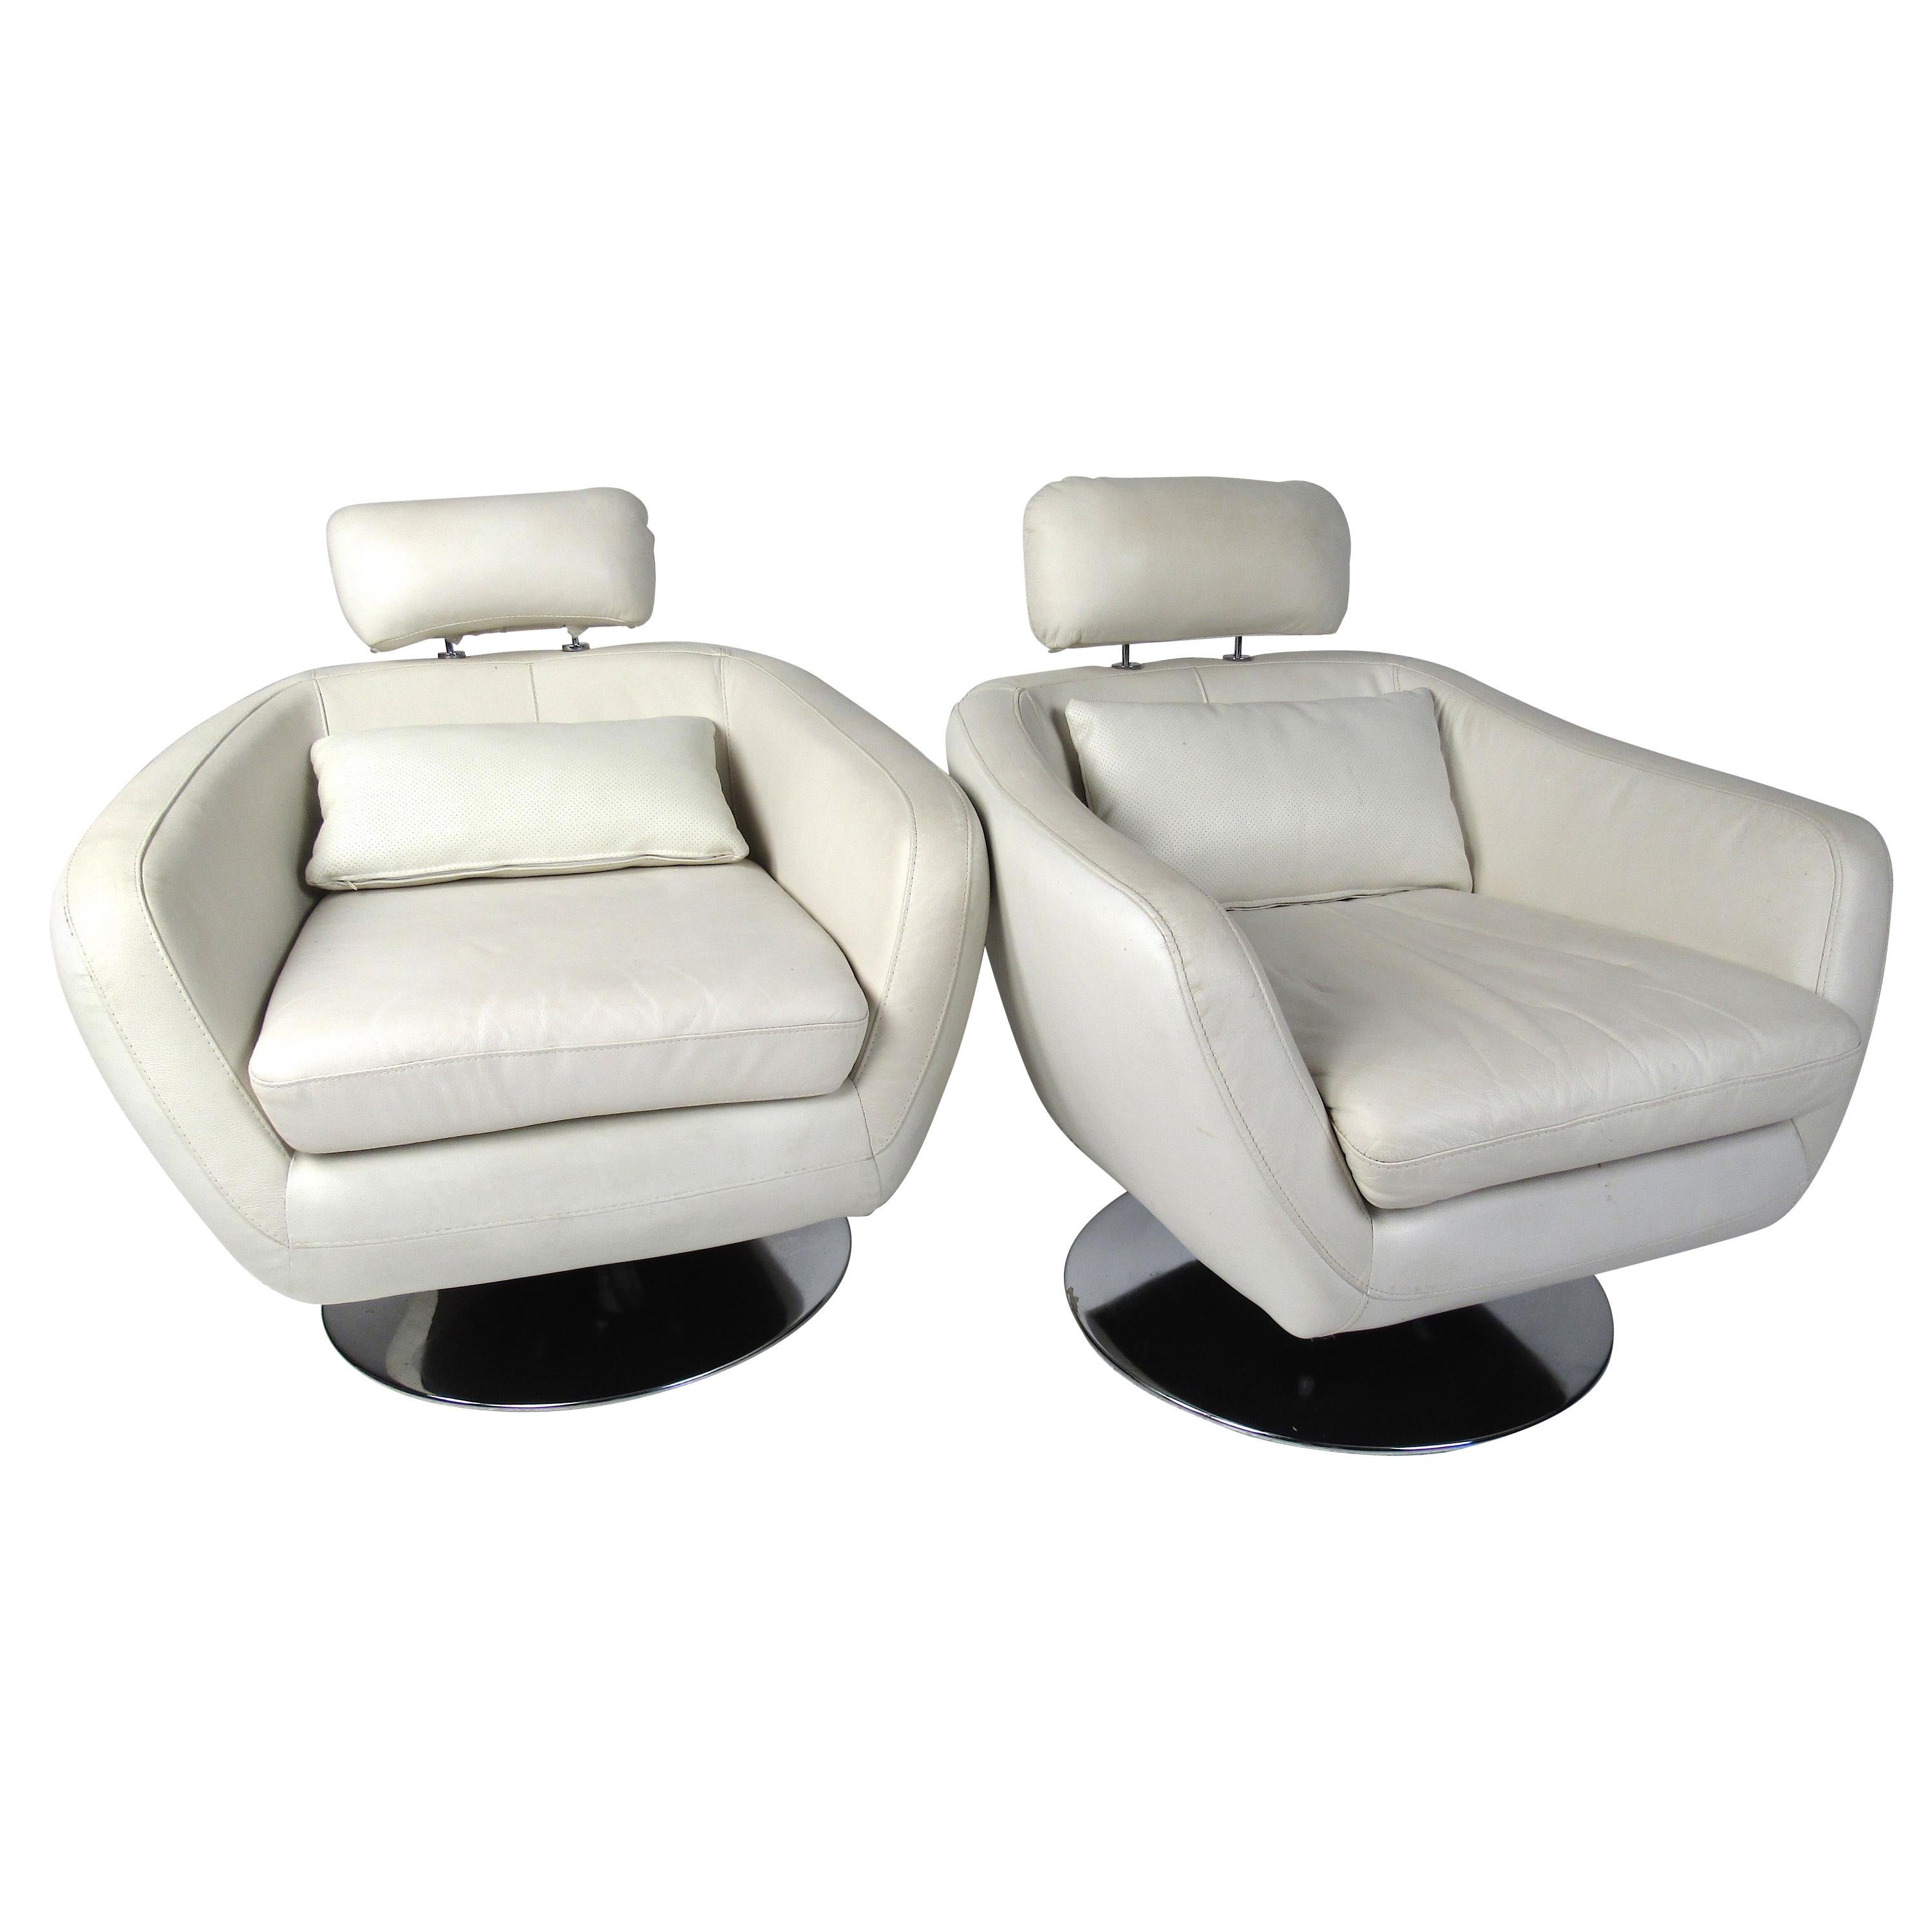 Pair of Modern Style Swivel Lounge Chairs